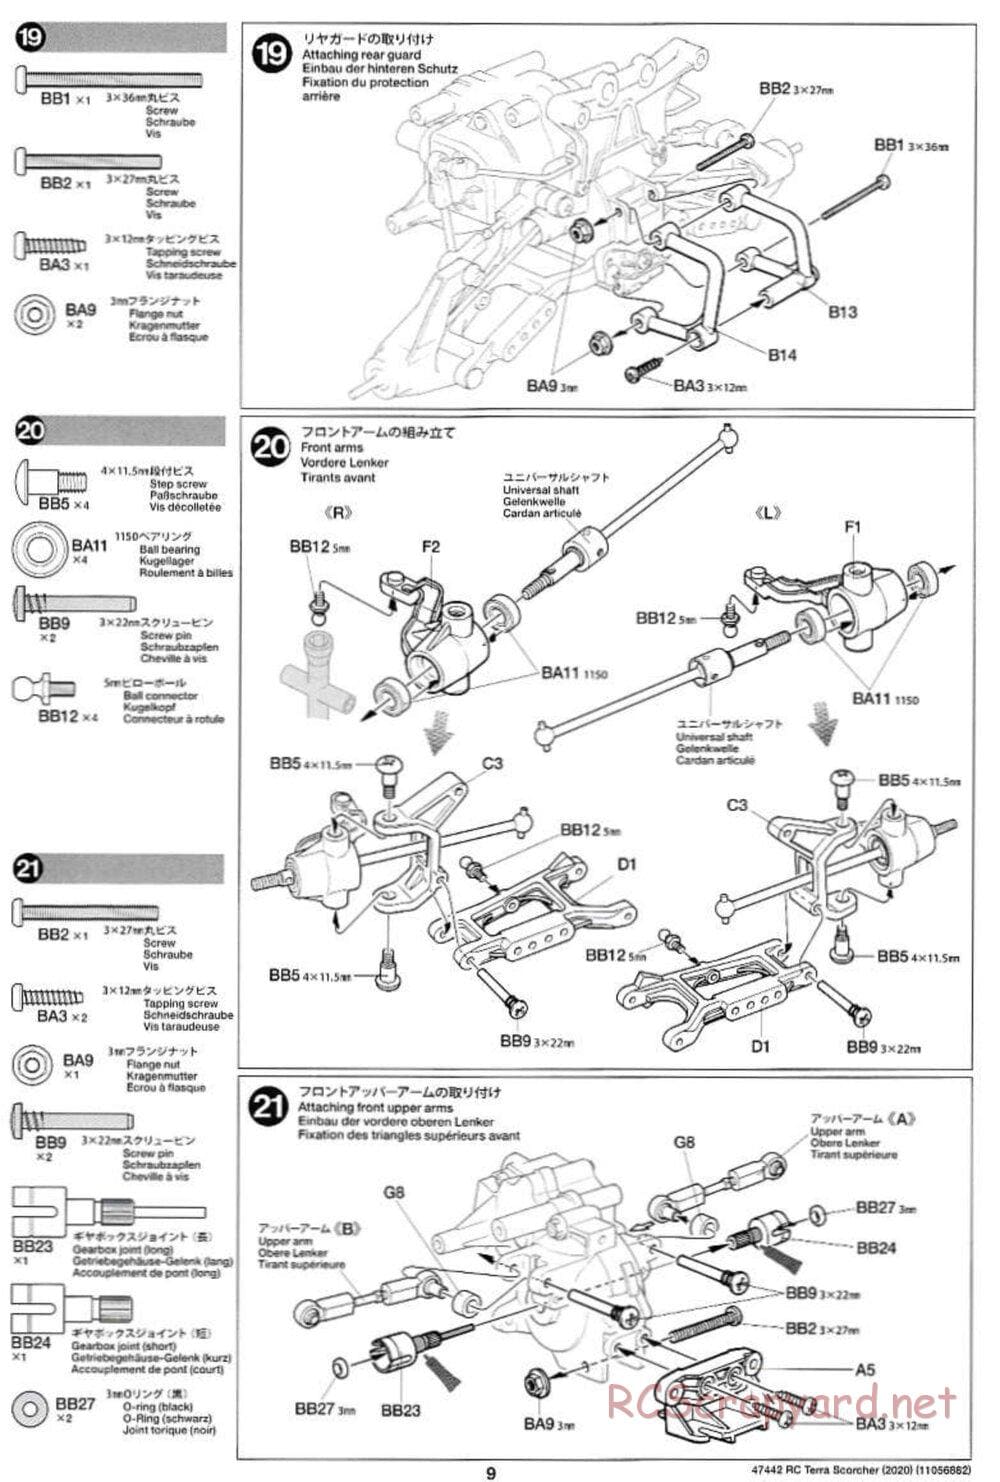 Tamiya - Terra Scorcher 2020 Chassis - Manual - Page 9